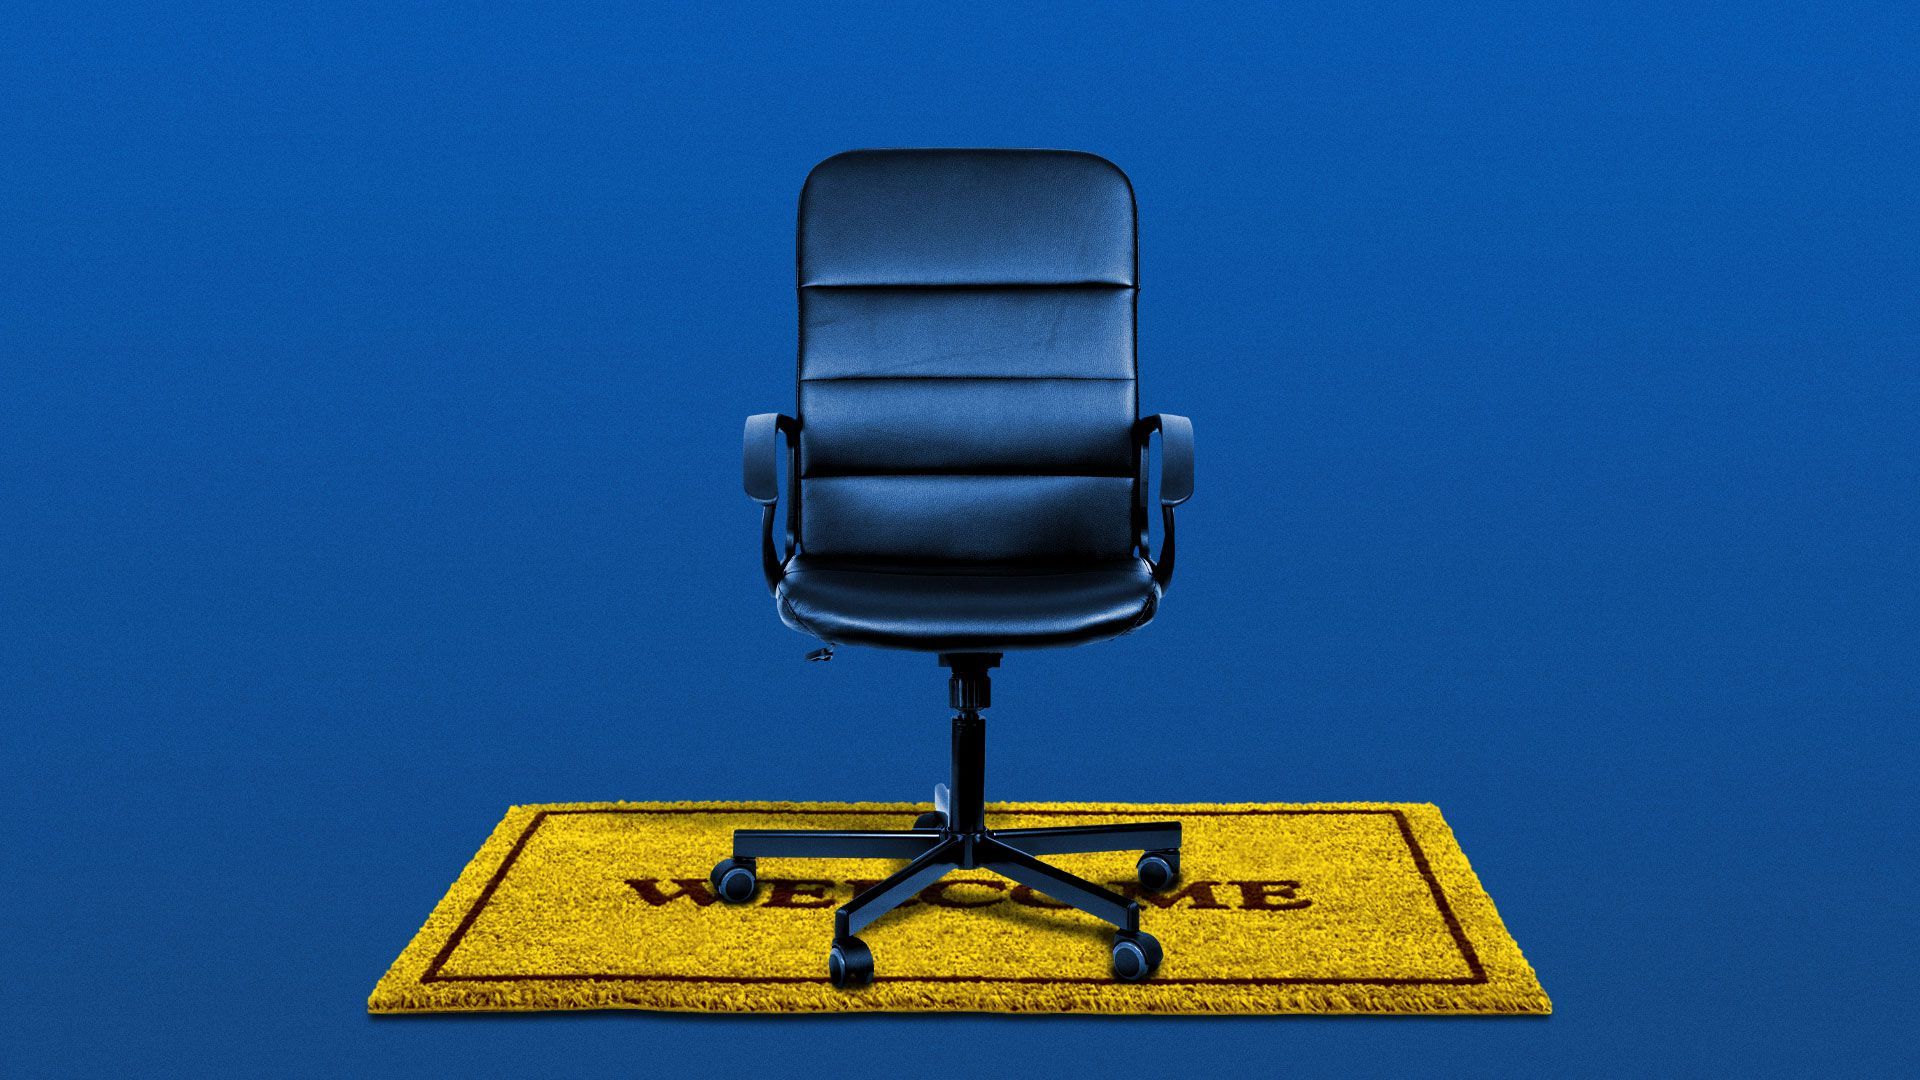 Illustration of office chair on a “welcome” home mat